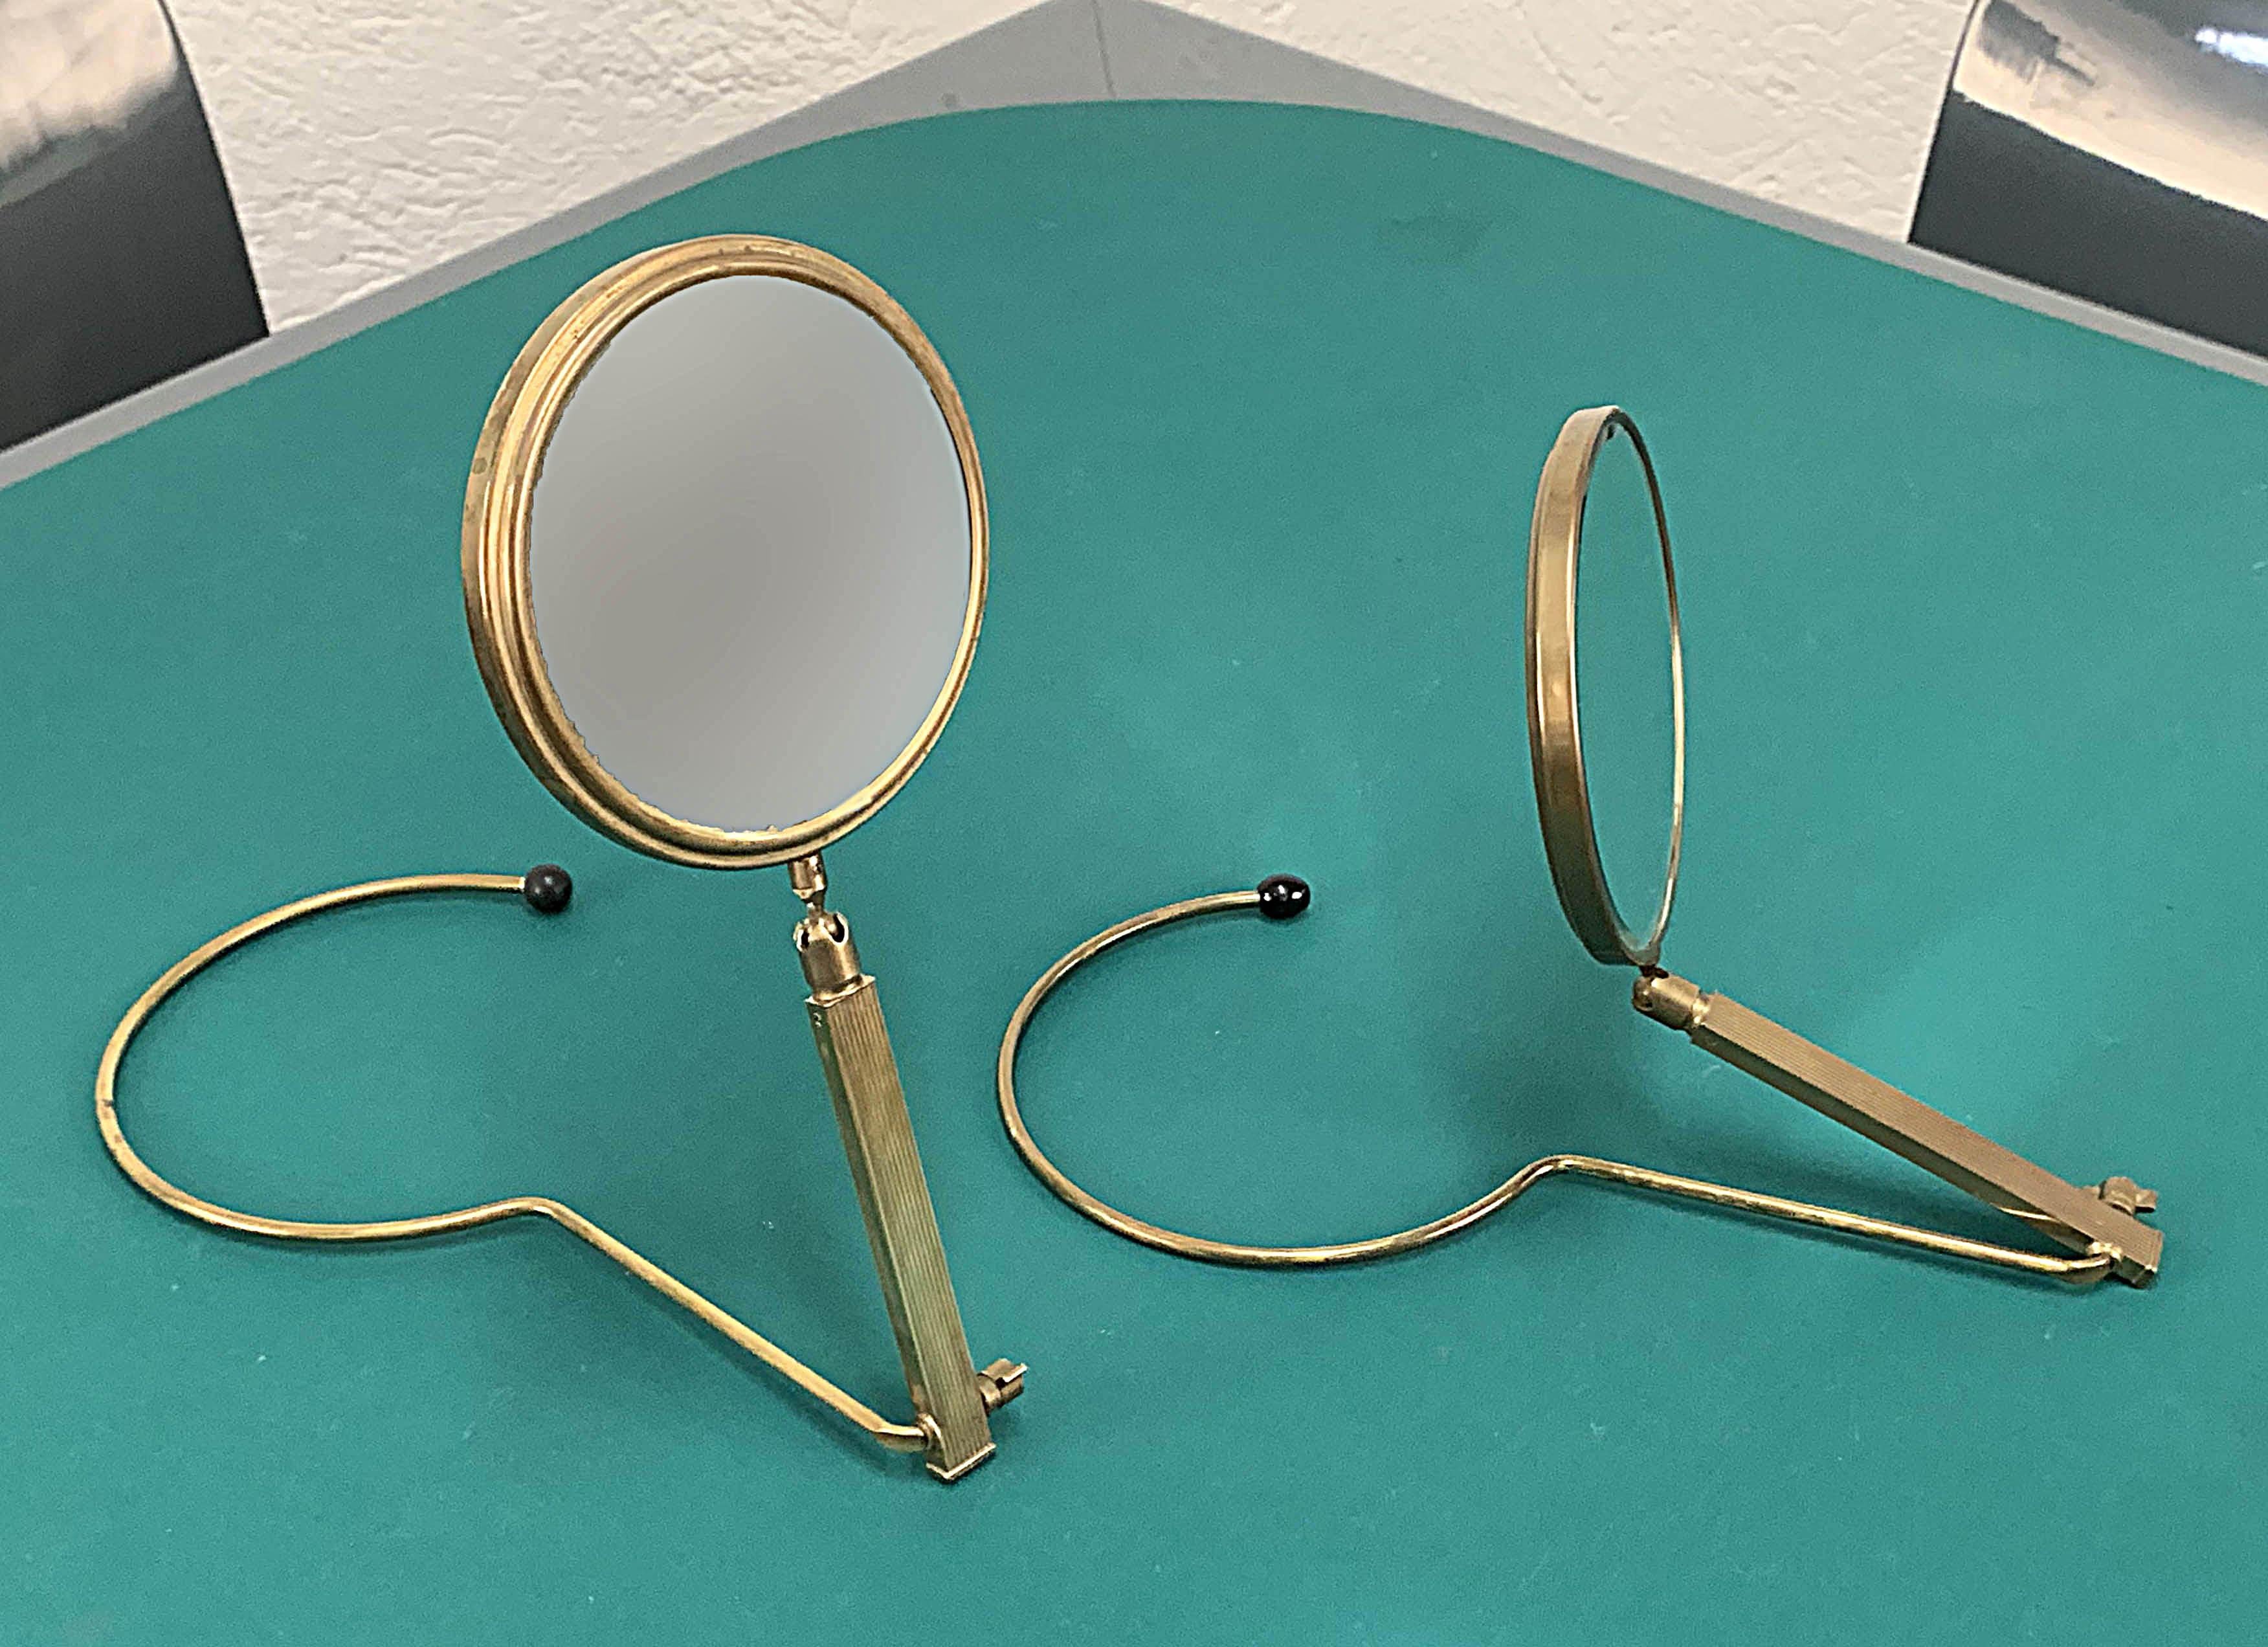 Midcentury Brass French Adjustable Table Mirror with a Two-Sides Stand, 1950s For Sale 11